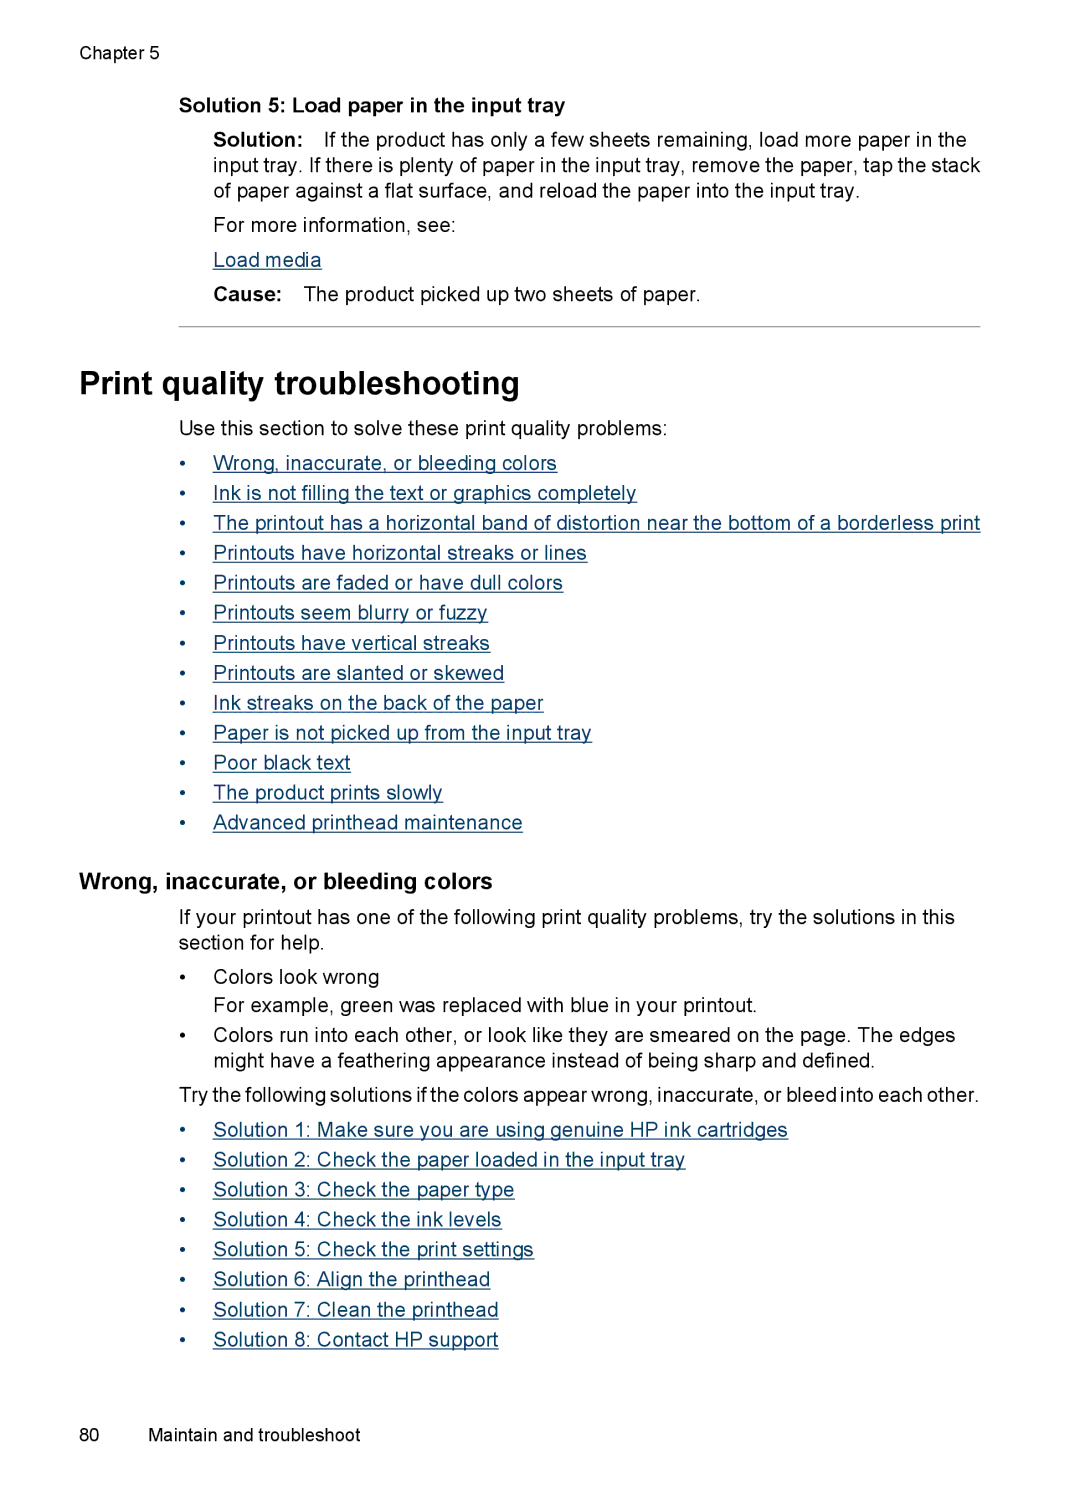 Hitachi E609 Print quality troubleshooting, Wrong, inaccurate, or bleeding colors, Solution 5 Load paper in the input tray 